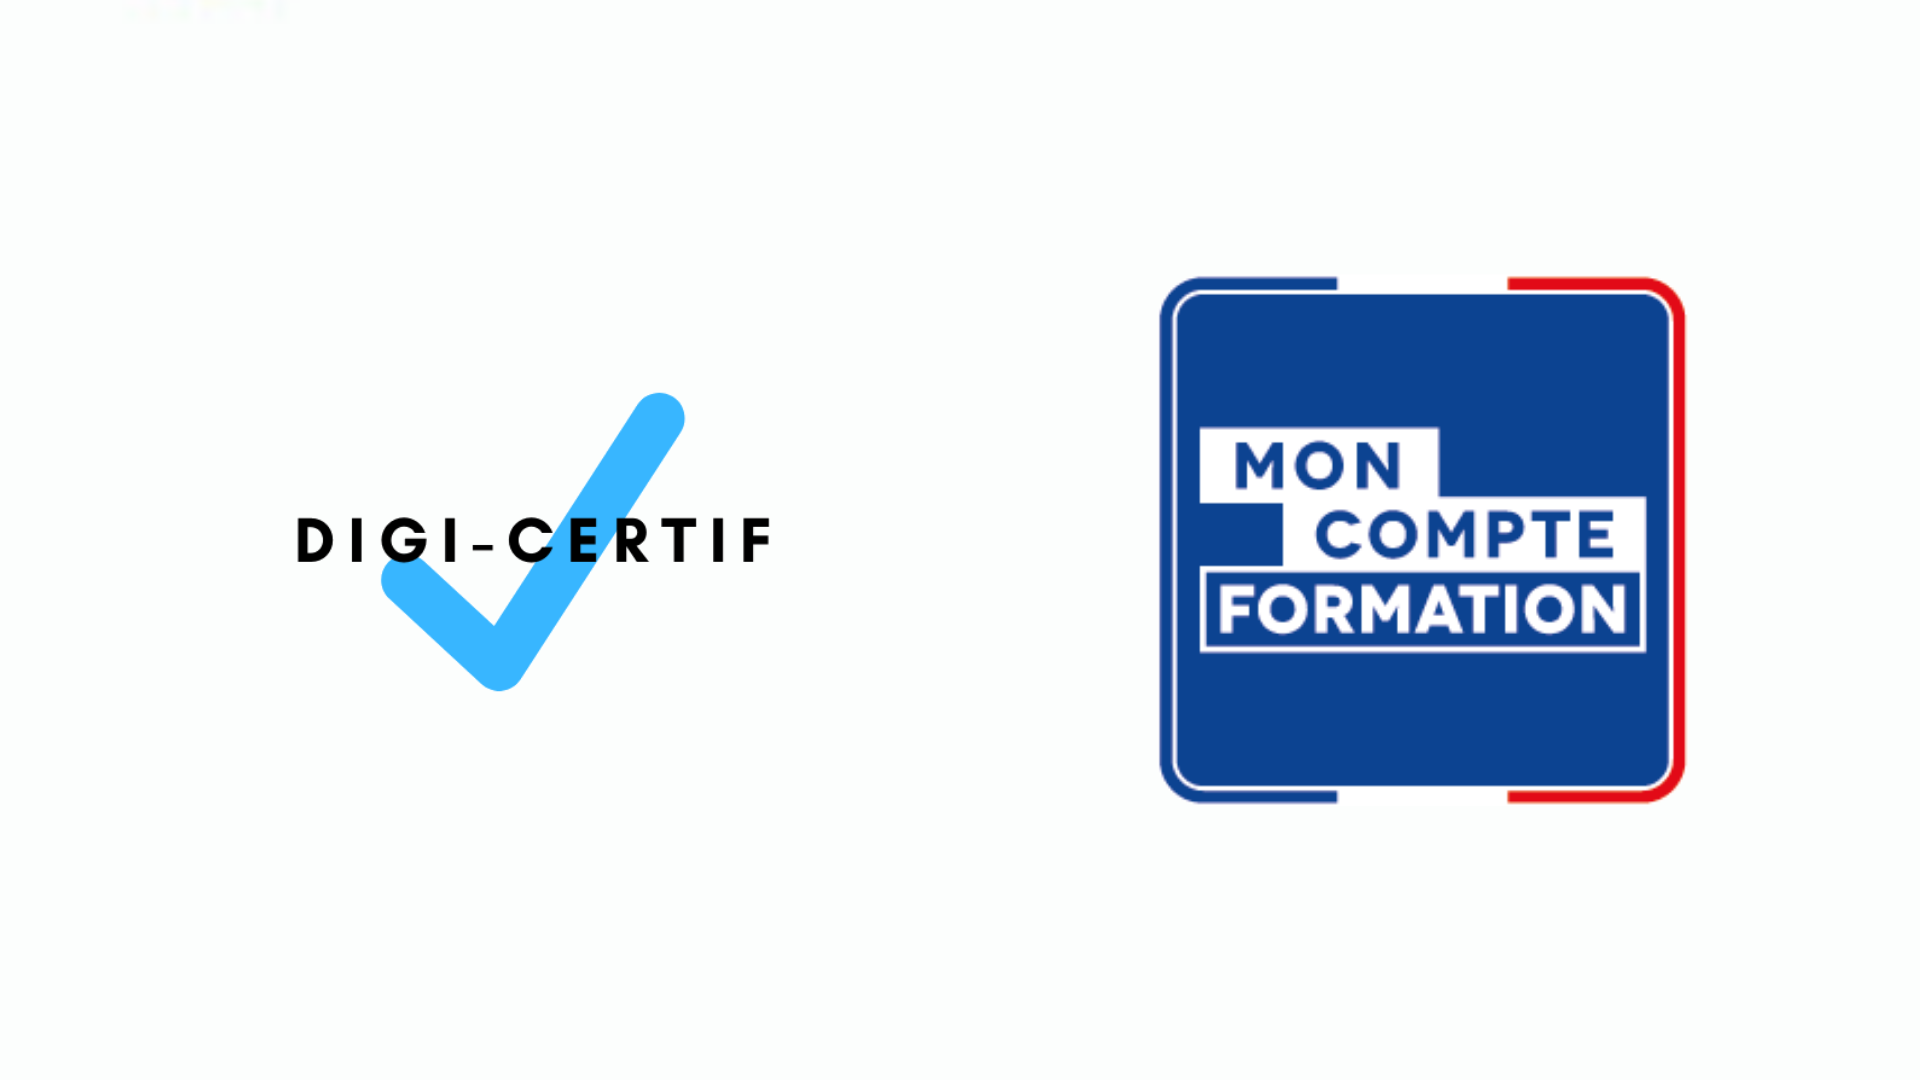 You are currently viewing Les formations Digi-Certif éligibles à Mon Compte Formation CPF !